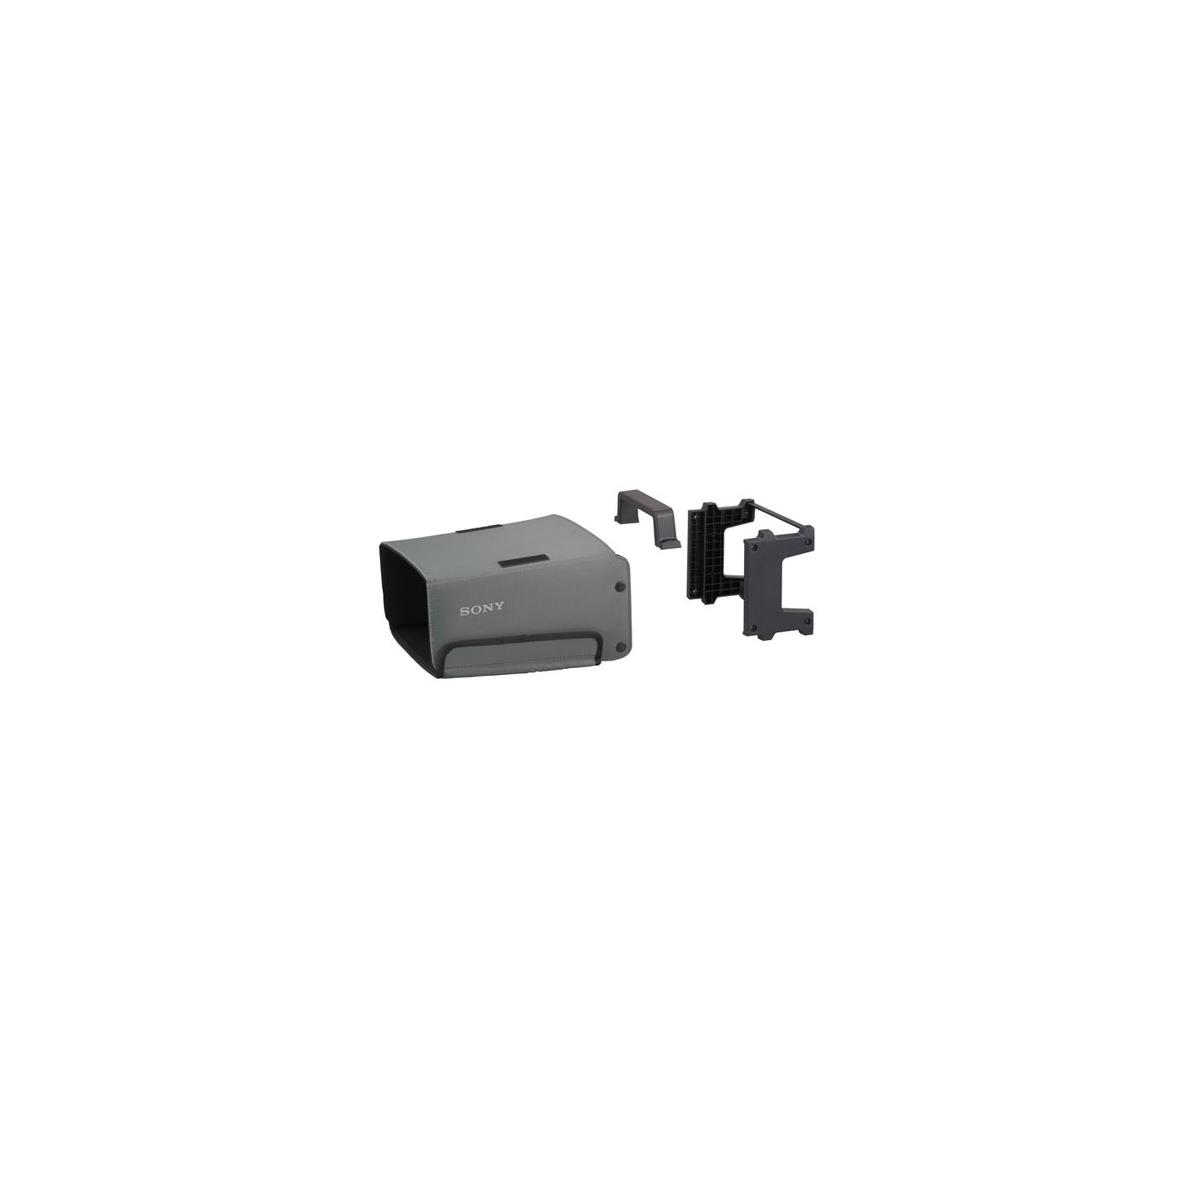 Image of Sony ENG Monitor Field Kit for LMD940W Monitor